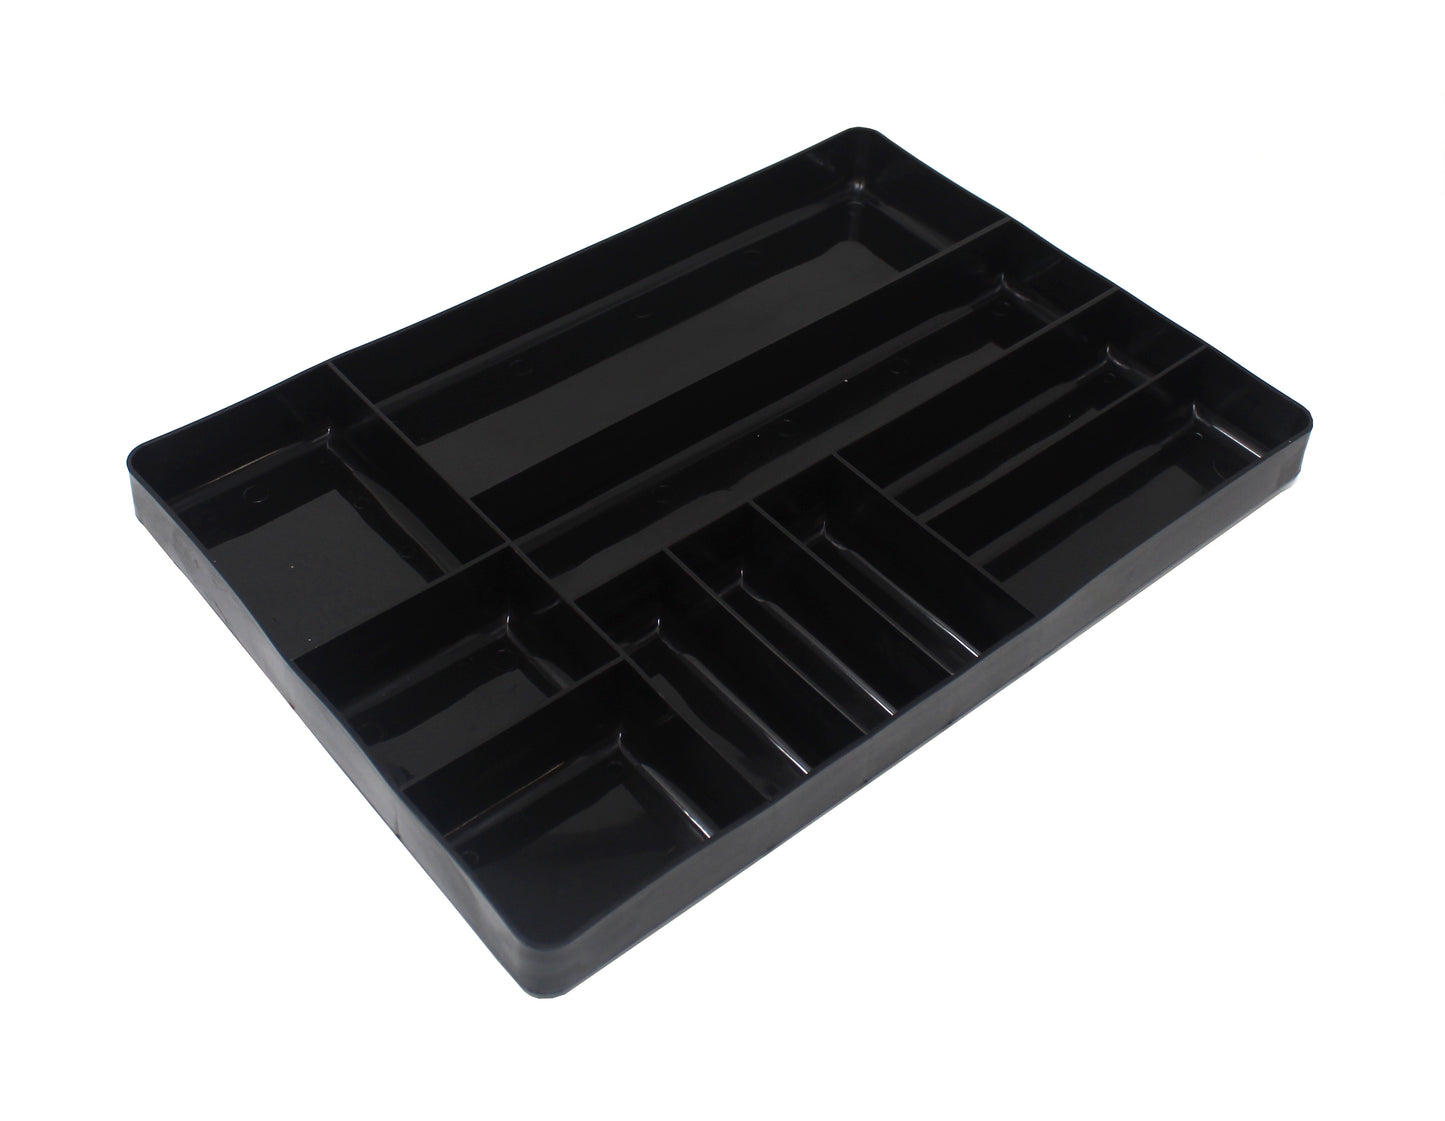 Stackable Lightweight 10 Compartment Organizer Tray - Black or Red